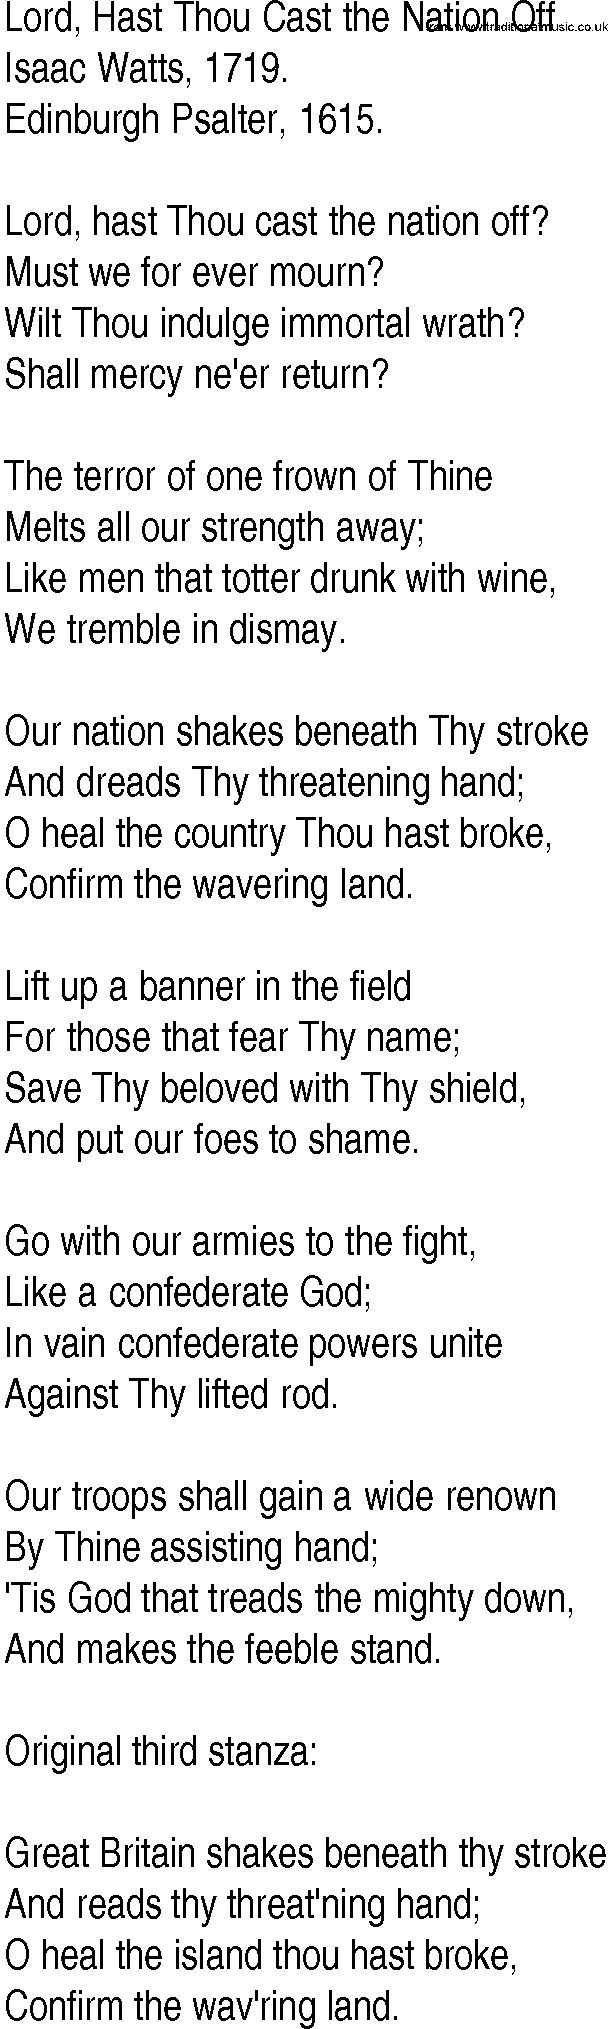 Hymn and Gospel Song: Lord, Hast Thou Cast the Nation Off by Isaac Watts lyrics